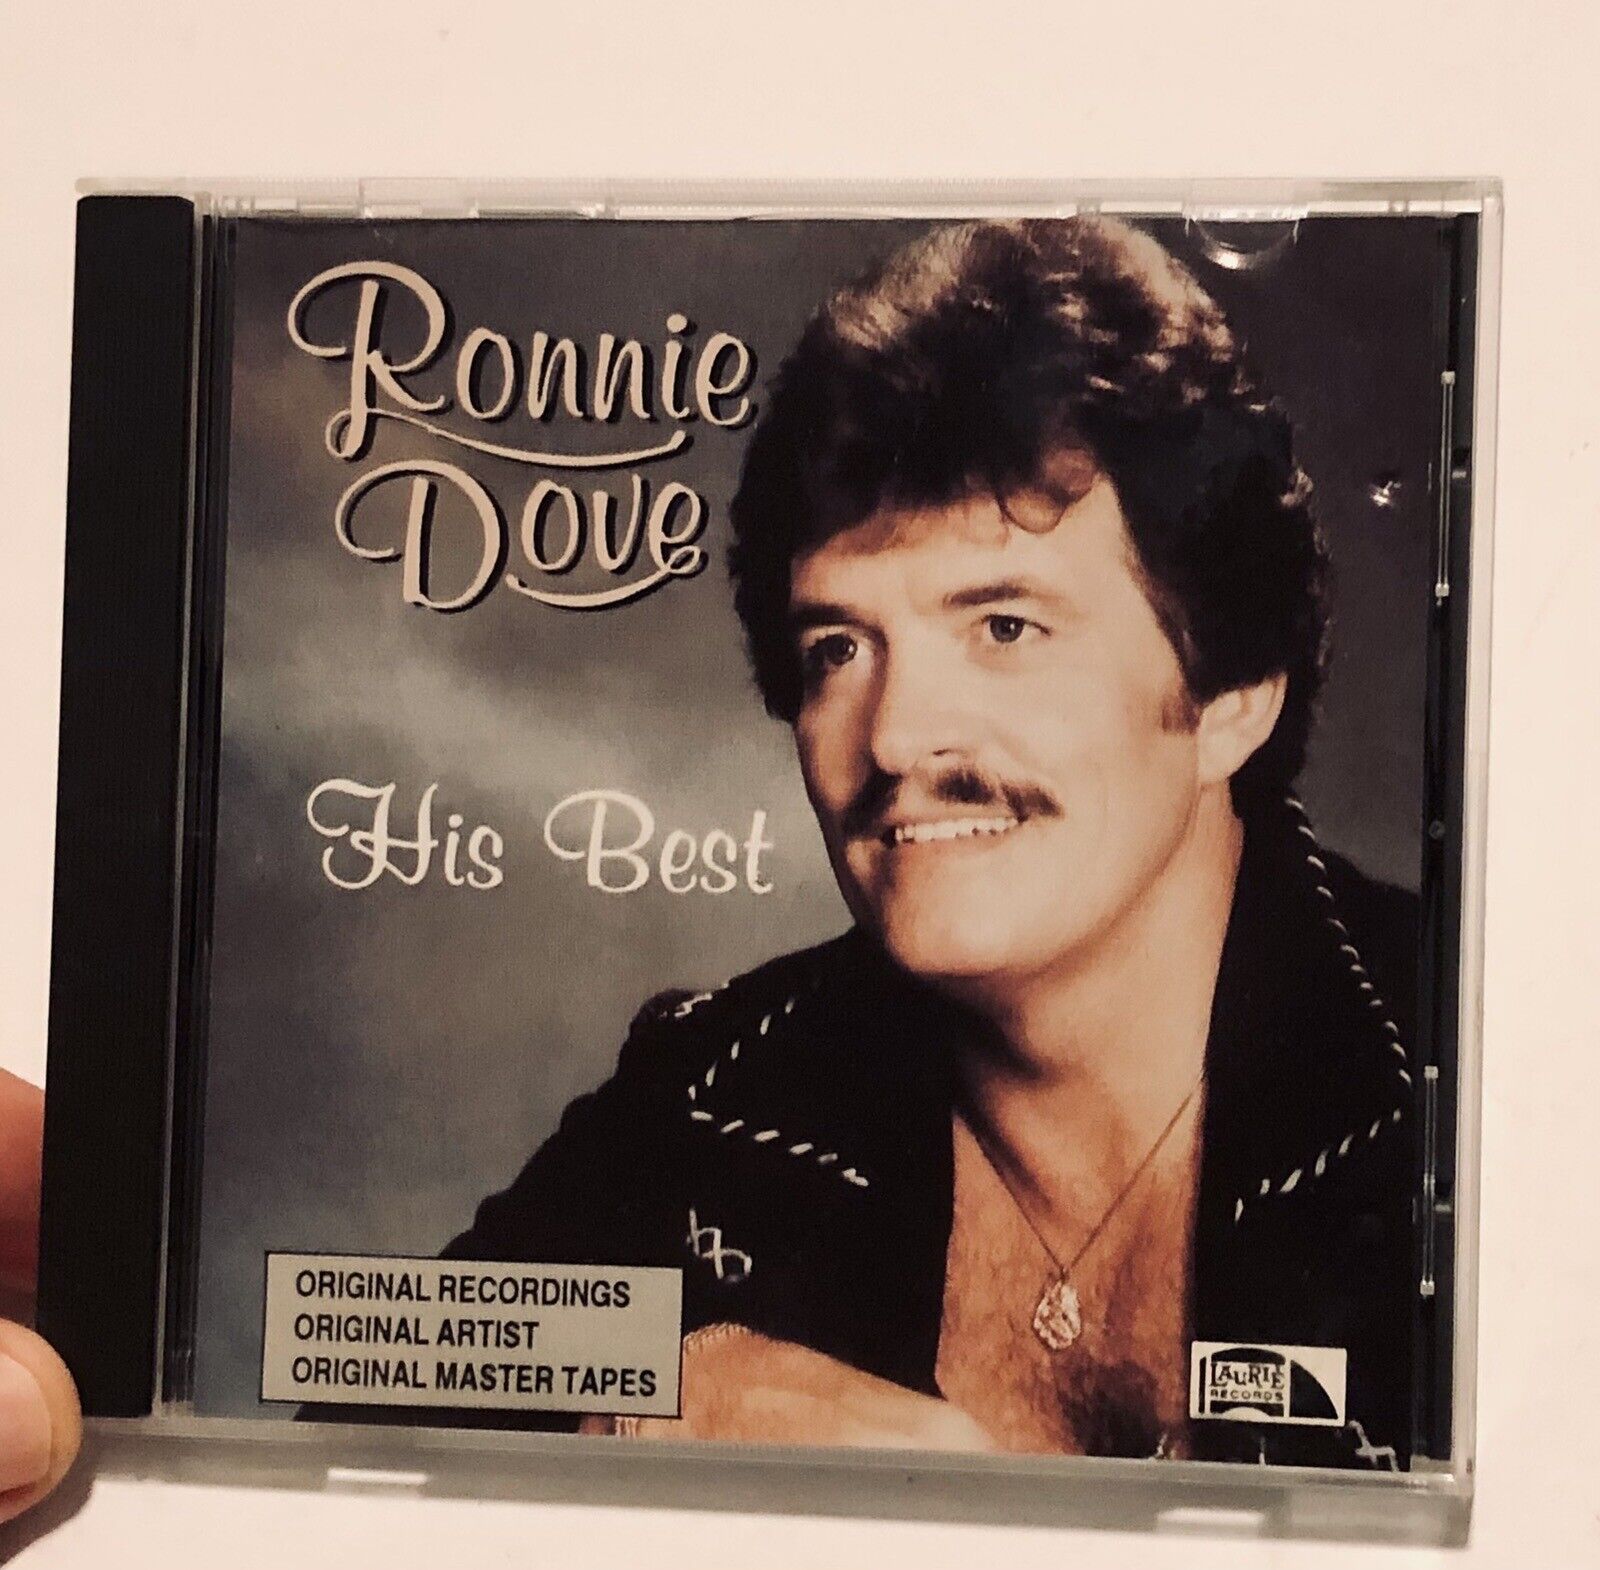 Ronnie Dove - His Best, CD (Laurie Records BCD 1008)